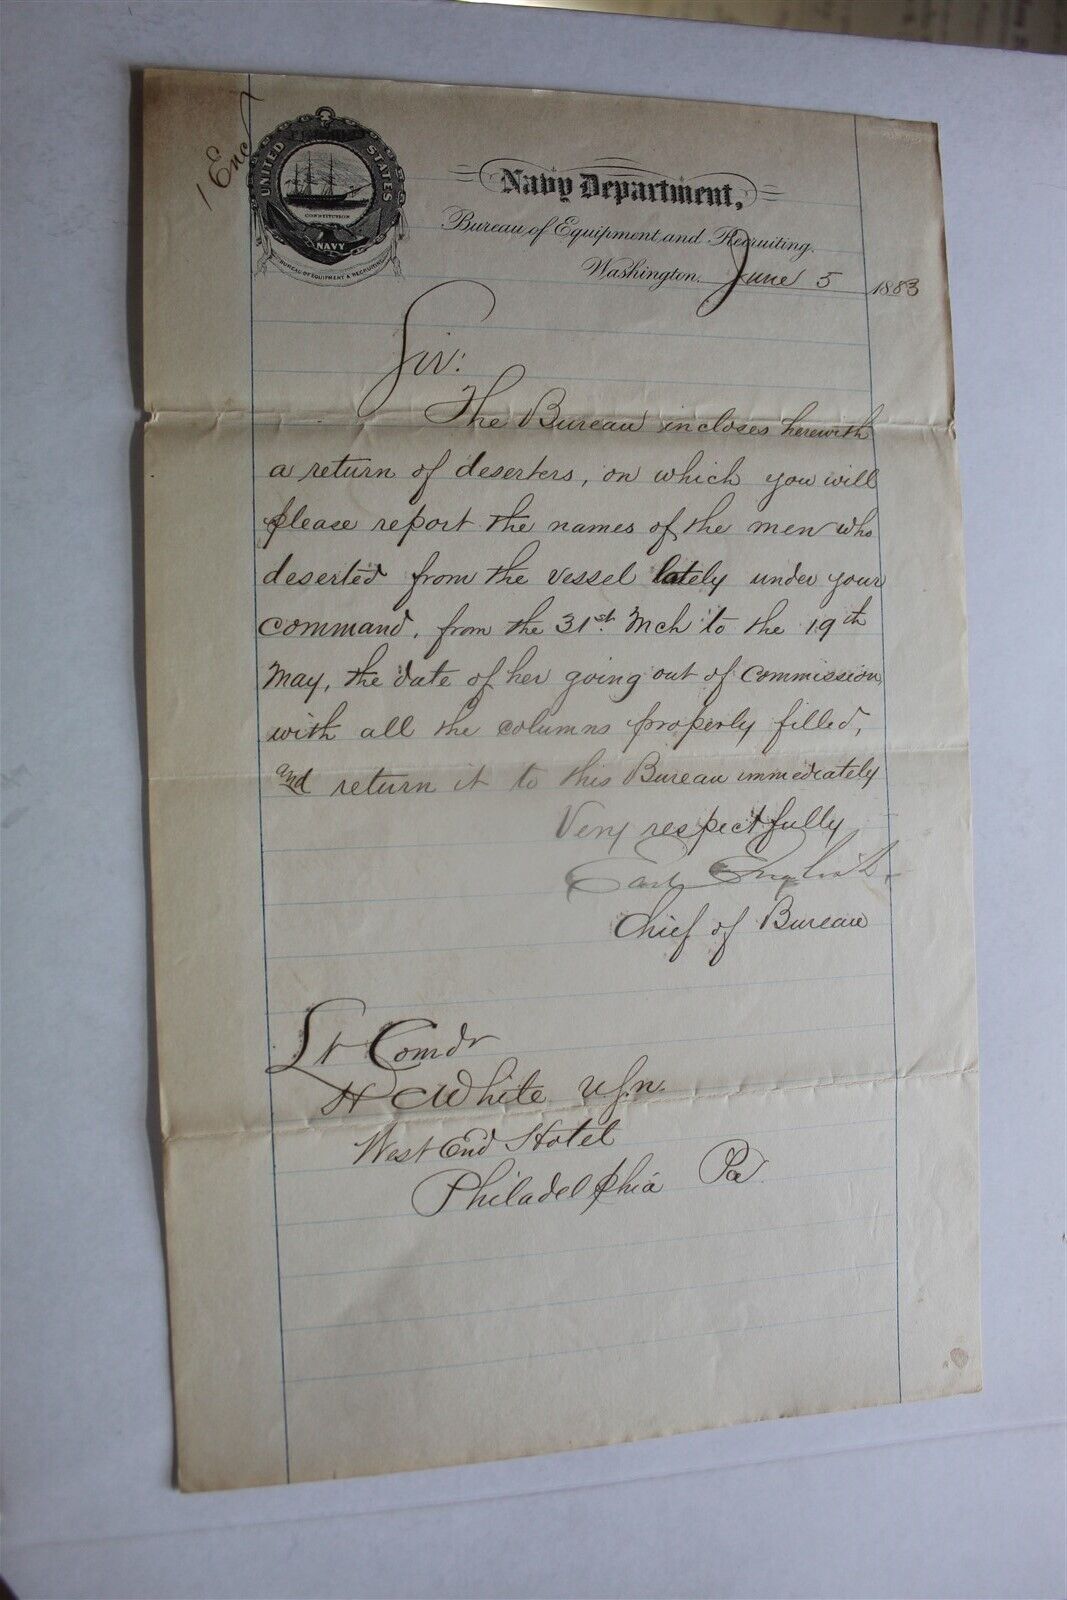 NAVY DEPT DOCUMENT 1883 - COMDR EARL ENGLISH AUTOGRAPHED ON OFFICIAL DOC